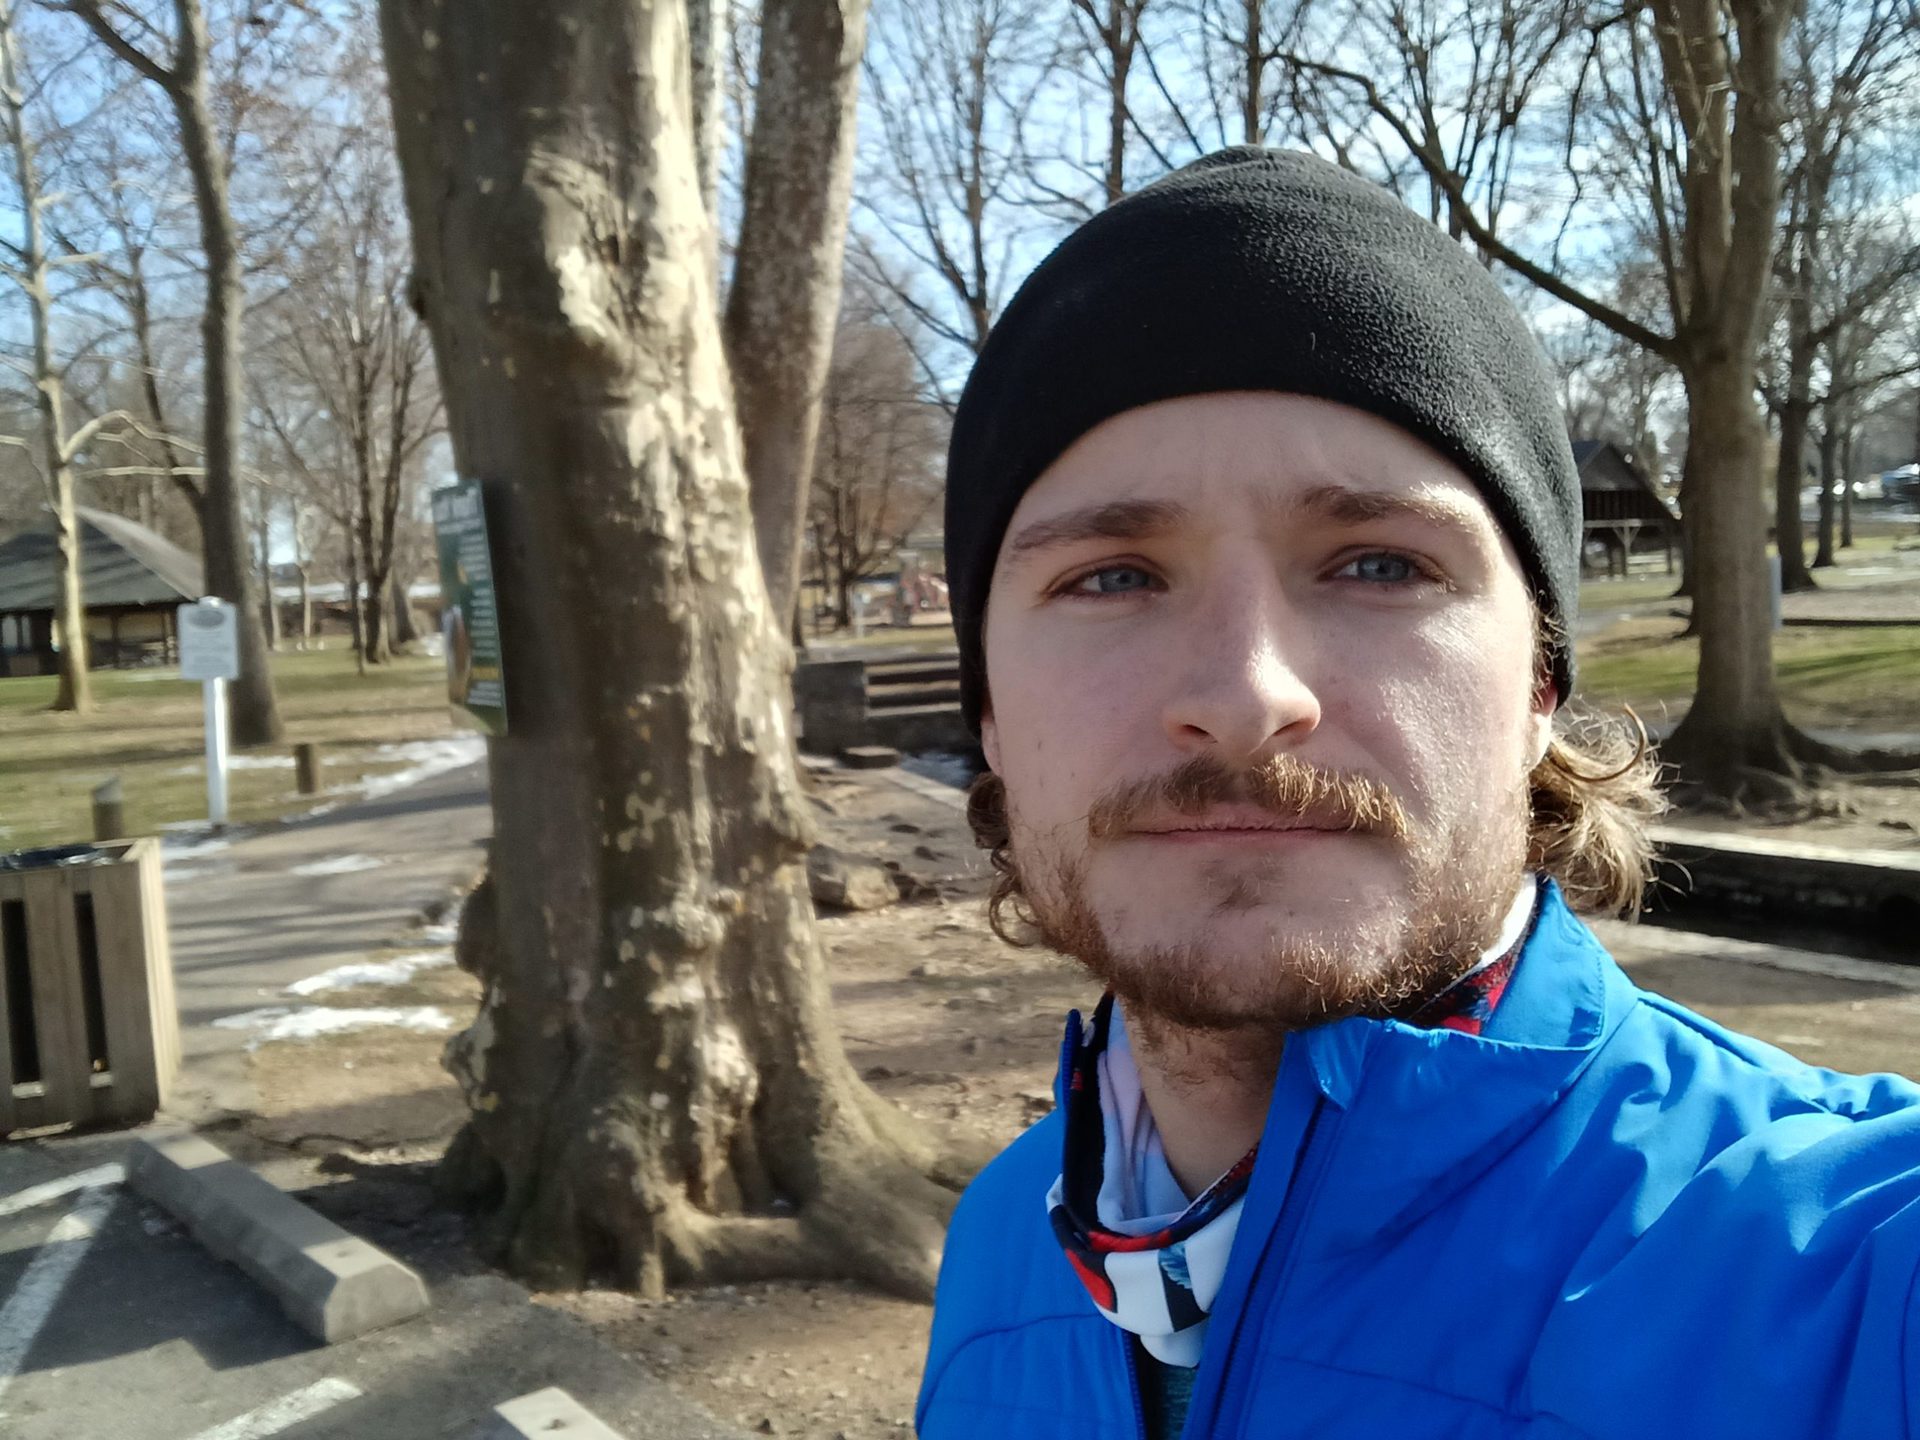 Galaxy A13 standard selfie taken outdoors of a man with facial hair wearing a black hat and a bright blue jacket